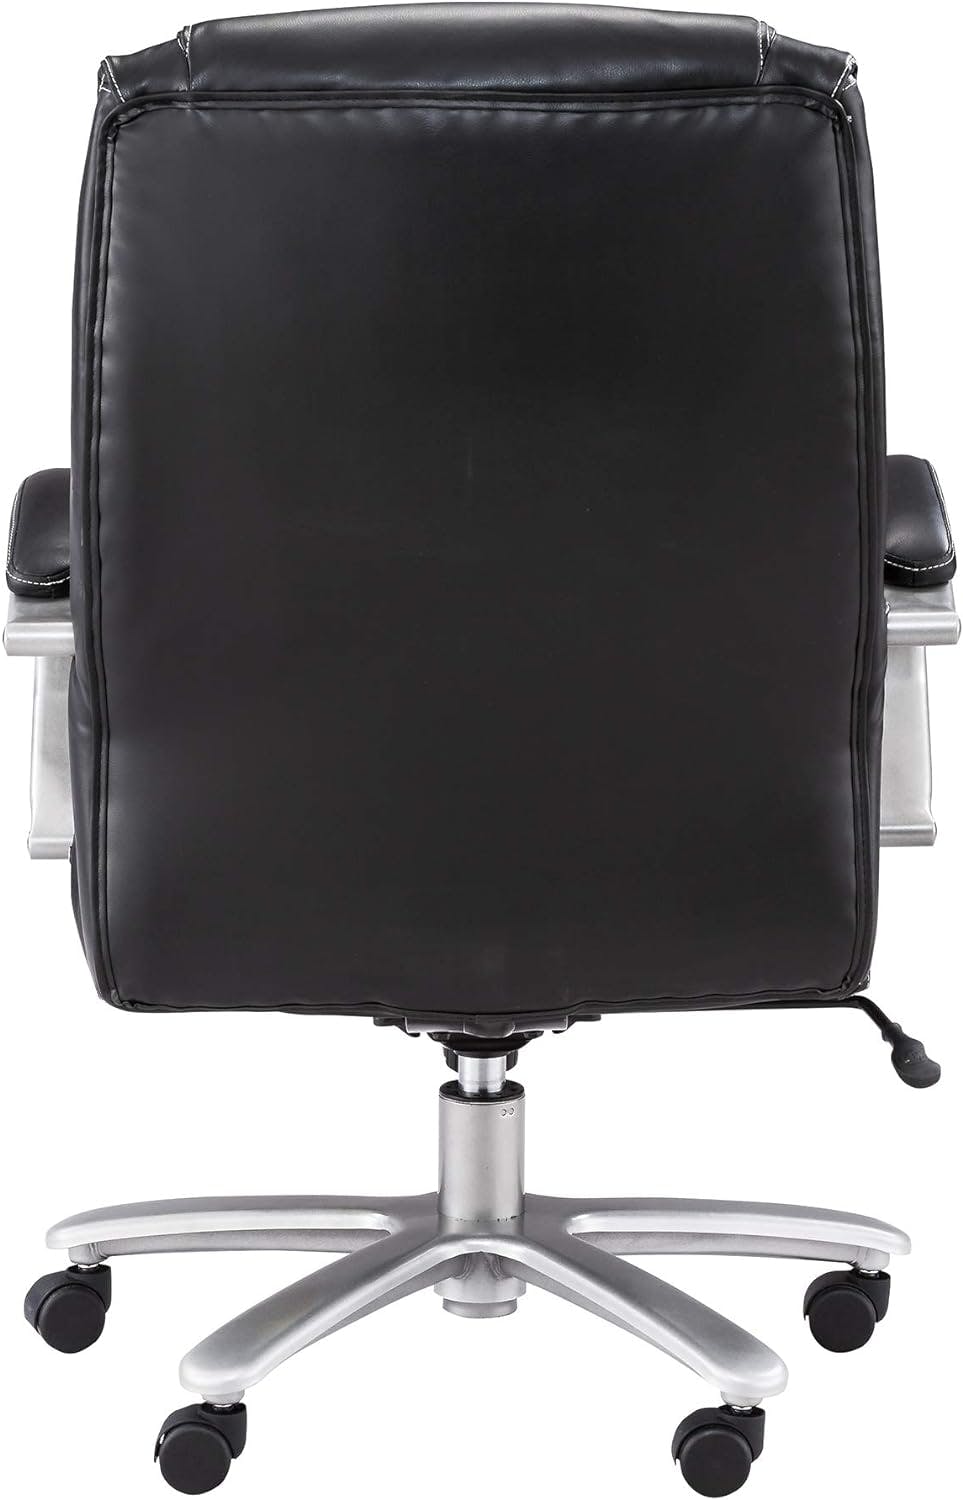 Executive High-Back Swivel Chair in Black Bonded Leather